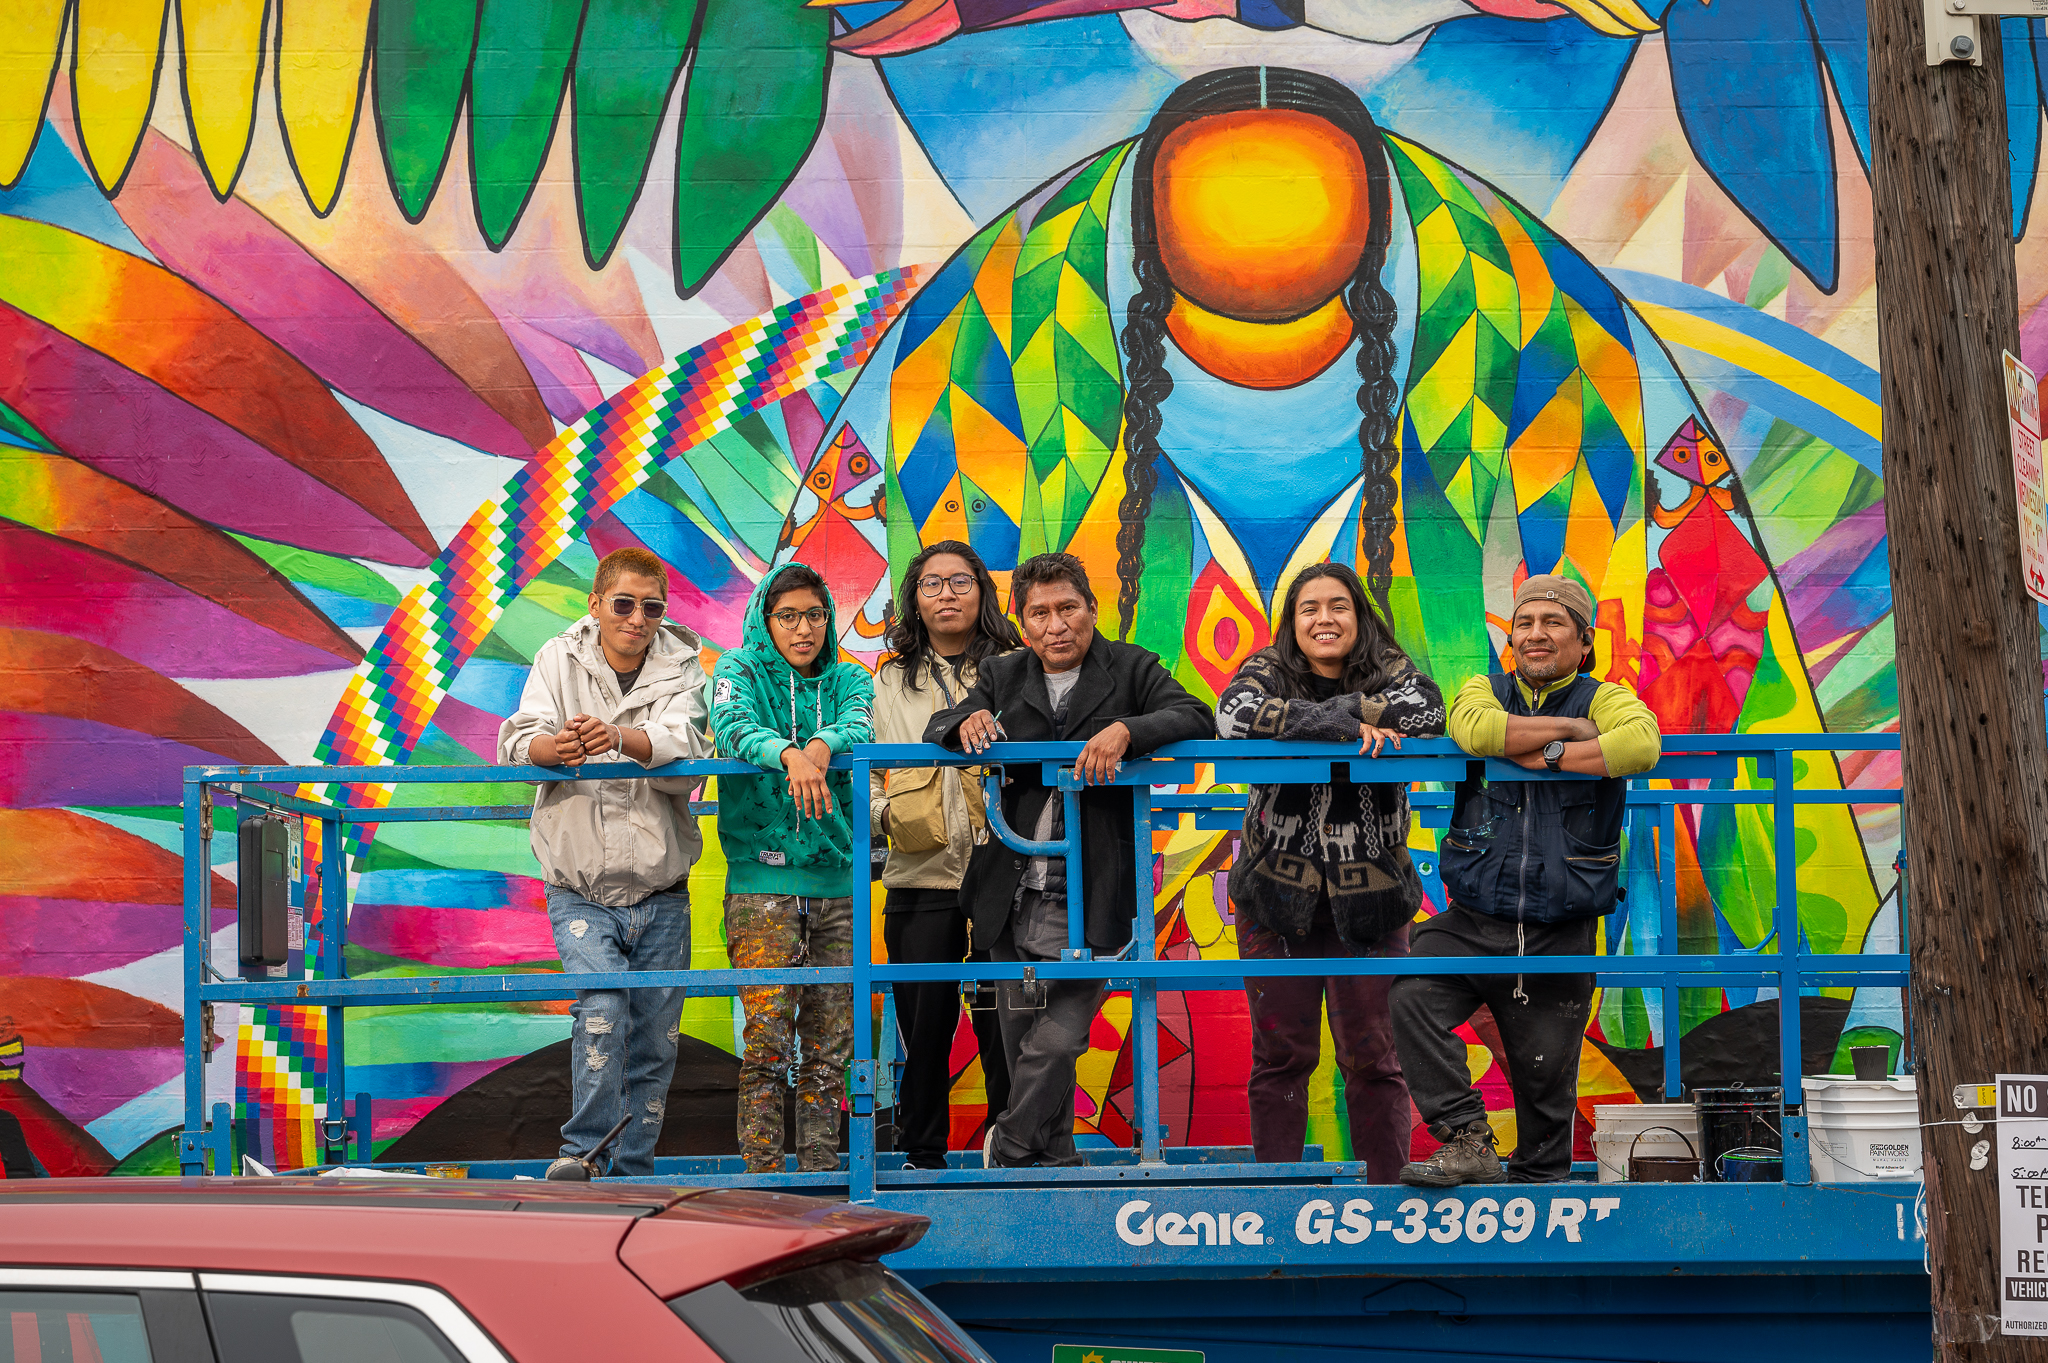 Ibi Padrón Venegas stands with Roberto Mamani Mamani and crew in front of the mural with the image of Pachamama at the center